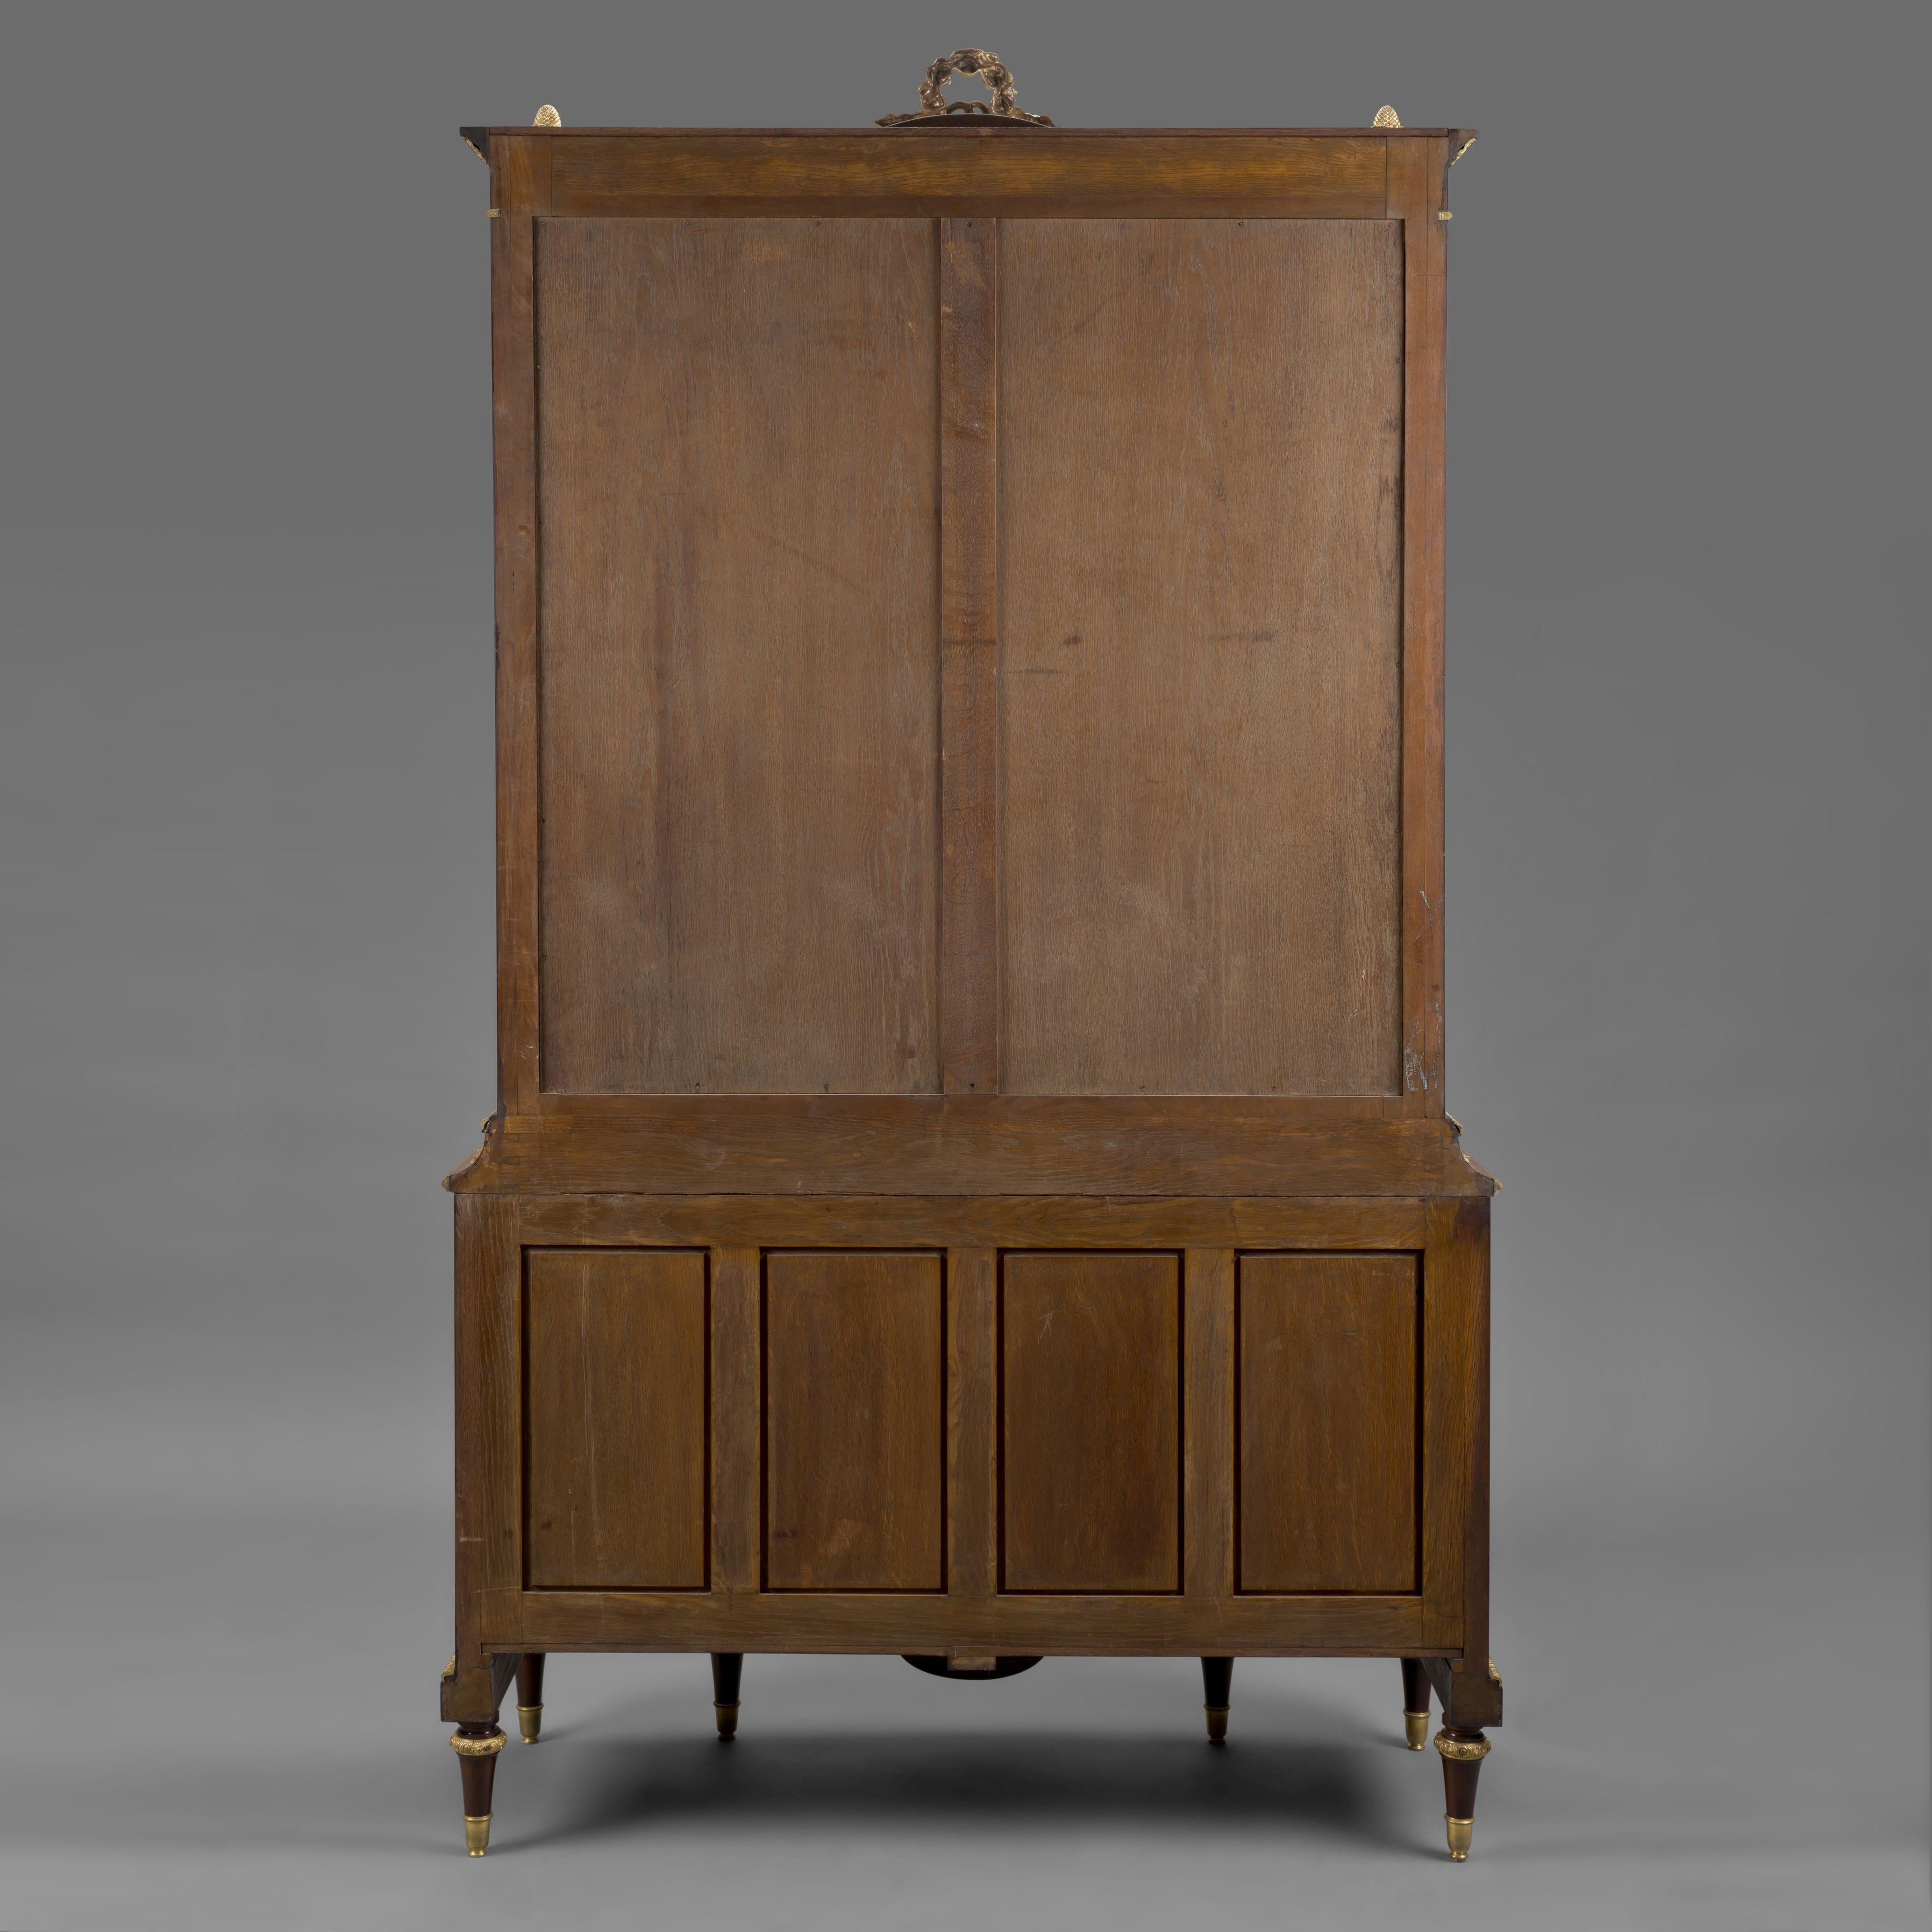 19th Century Louis XVI Style Gilt-Bronze Mounted Mahogany Display Cabinet For Sale